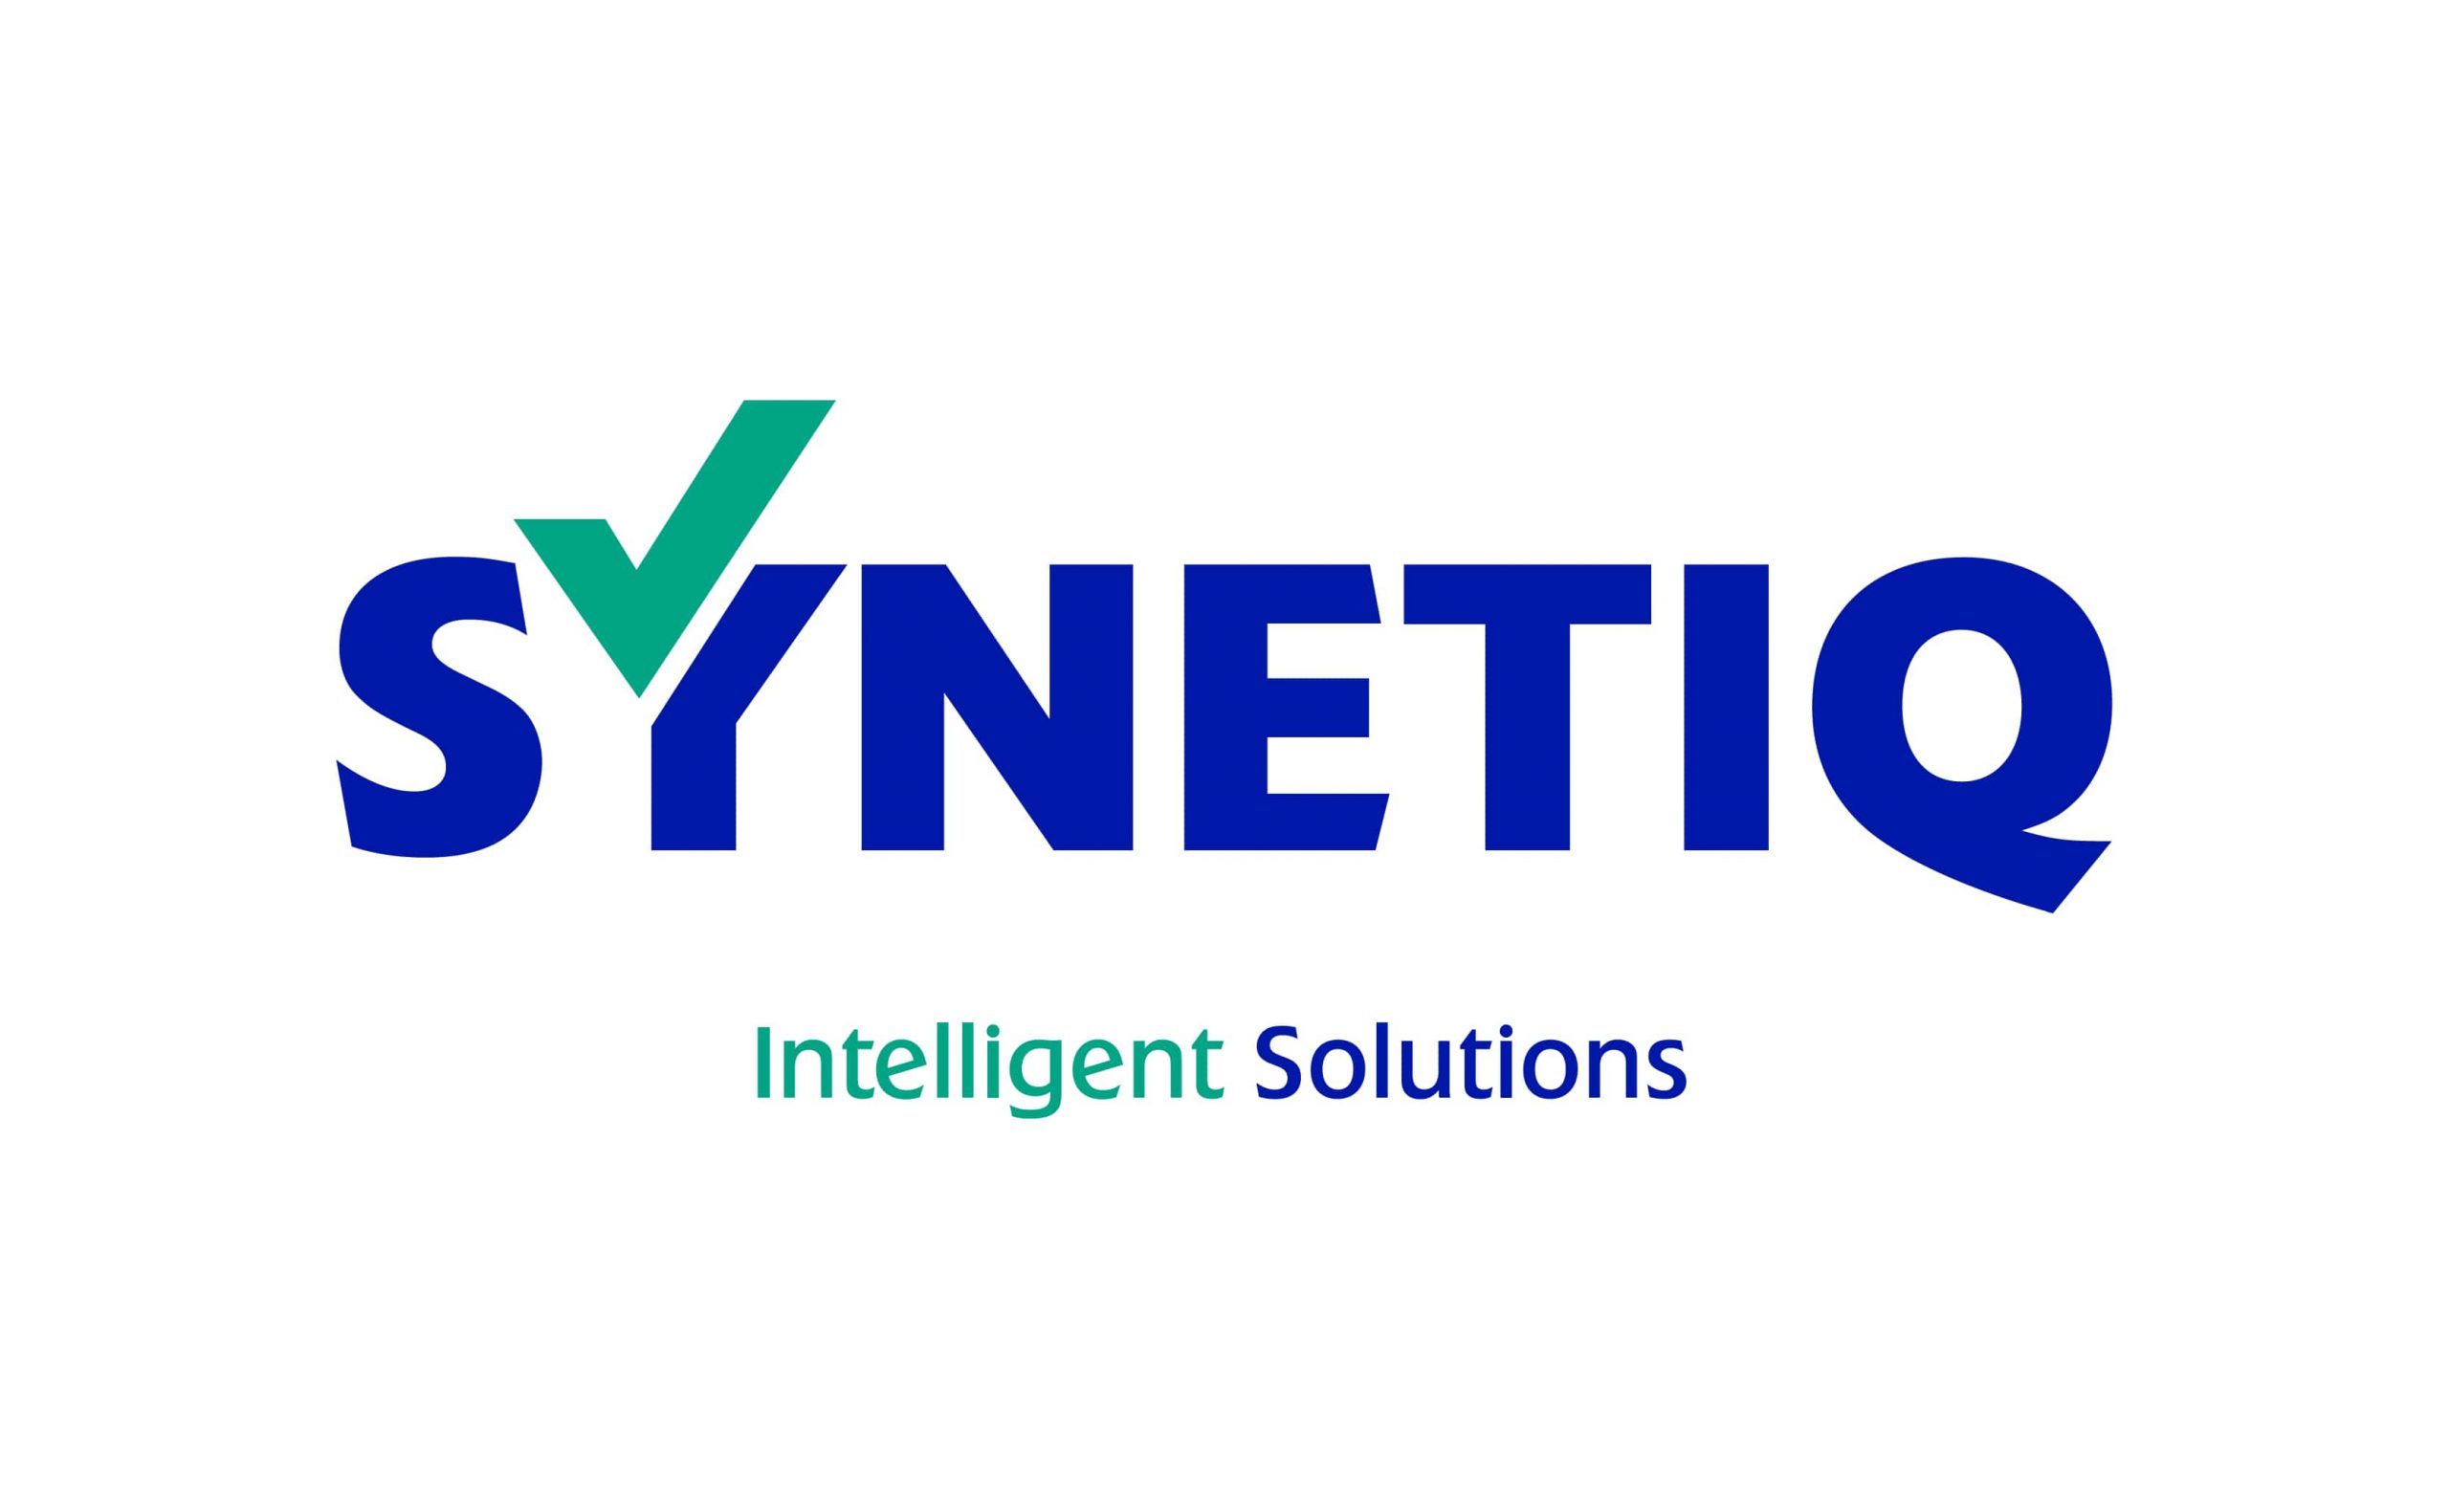 SYNETIQ works with repairers to reduce vehicle off-road time